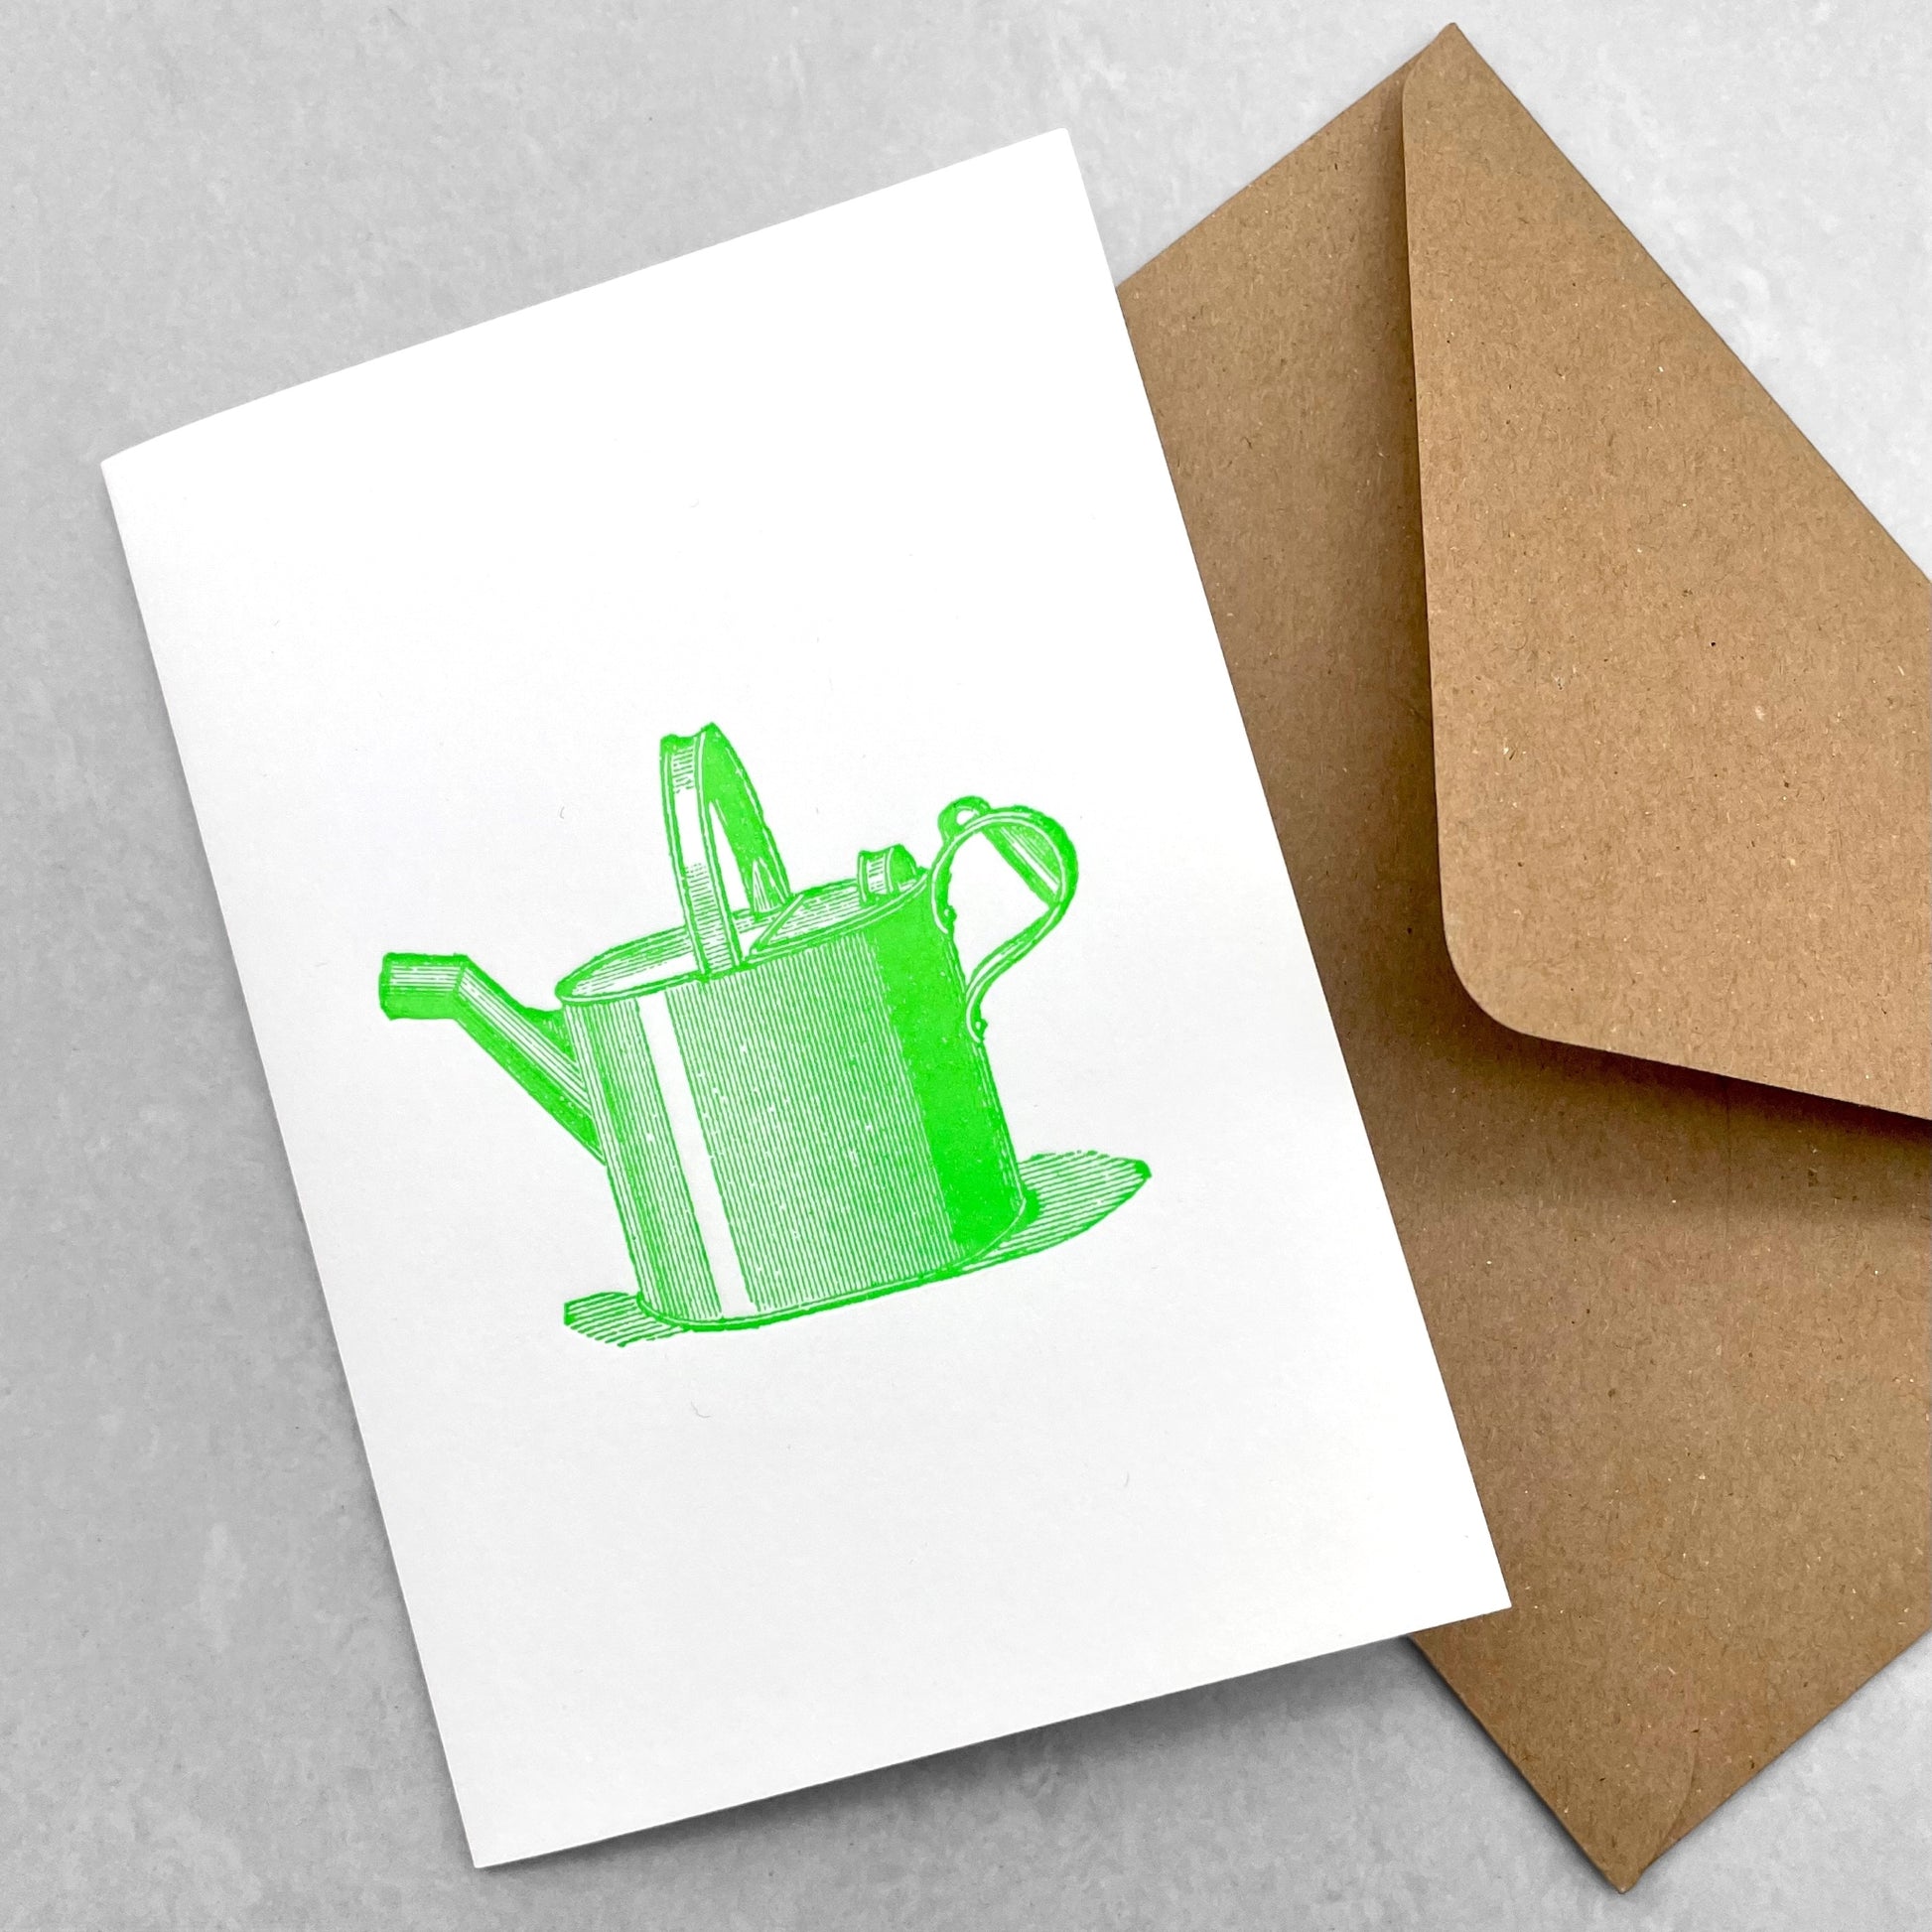 letterpress greetings card of a drawing of a watering can, lime green ink on white by Passenger Press